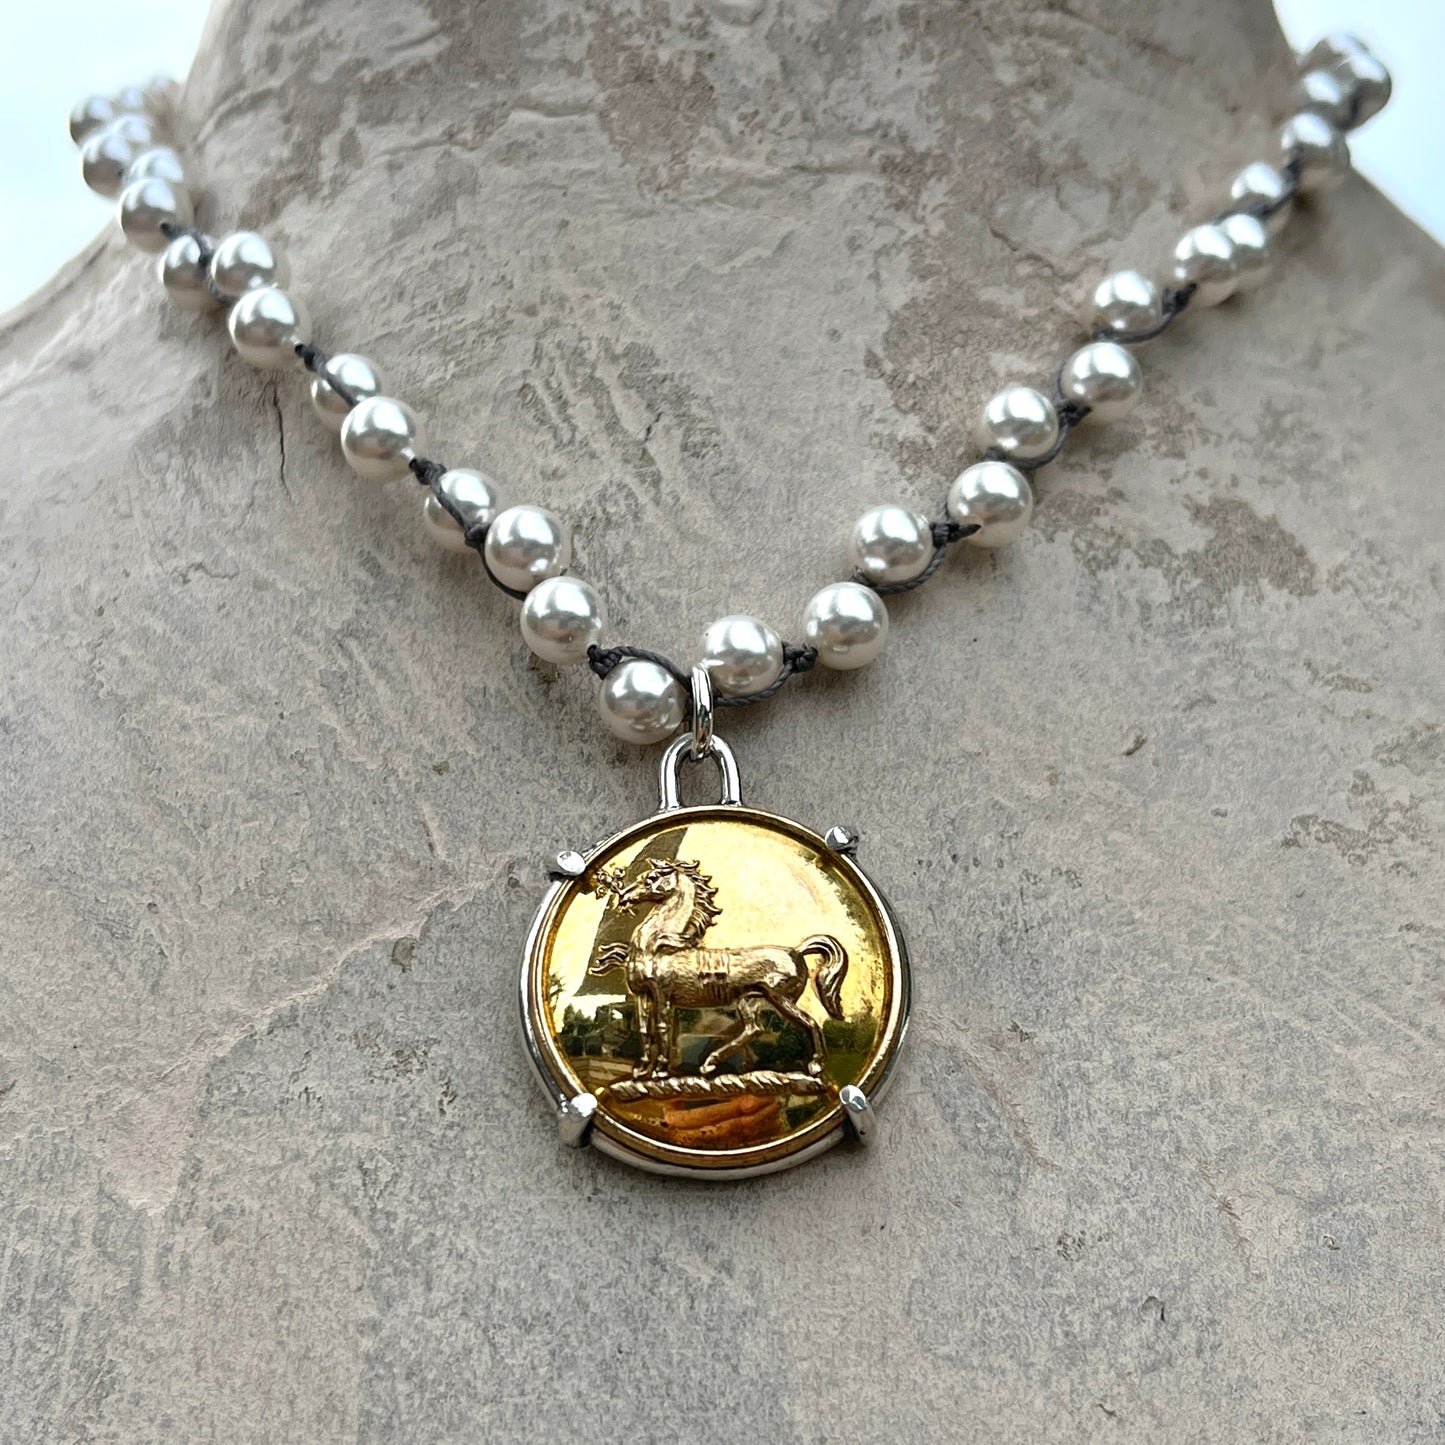 Vintage Brass Livery Horse Button on Pearl Necklace